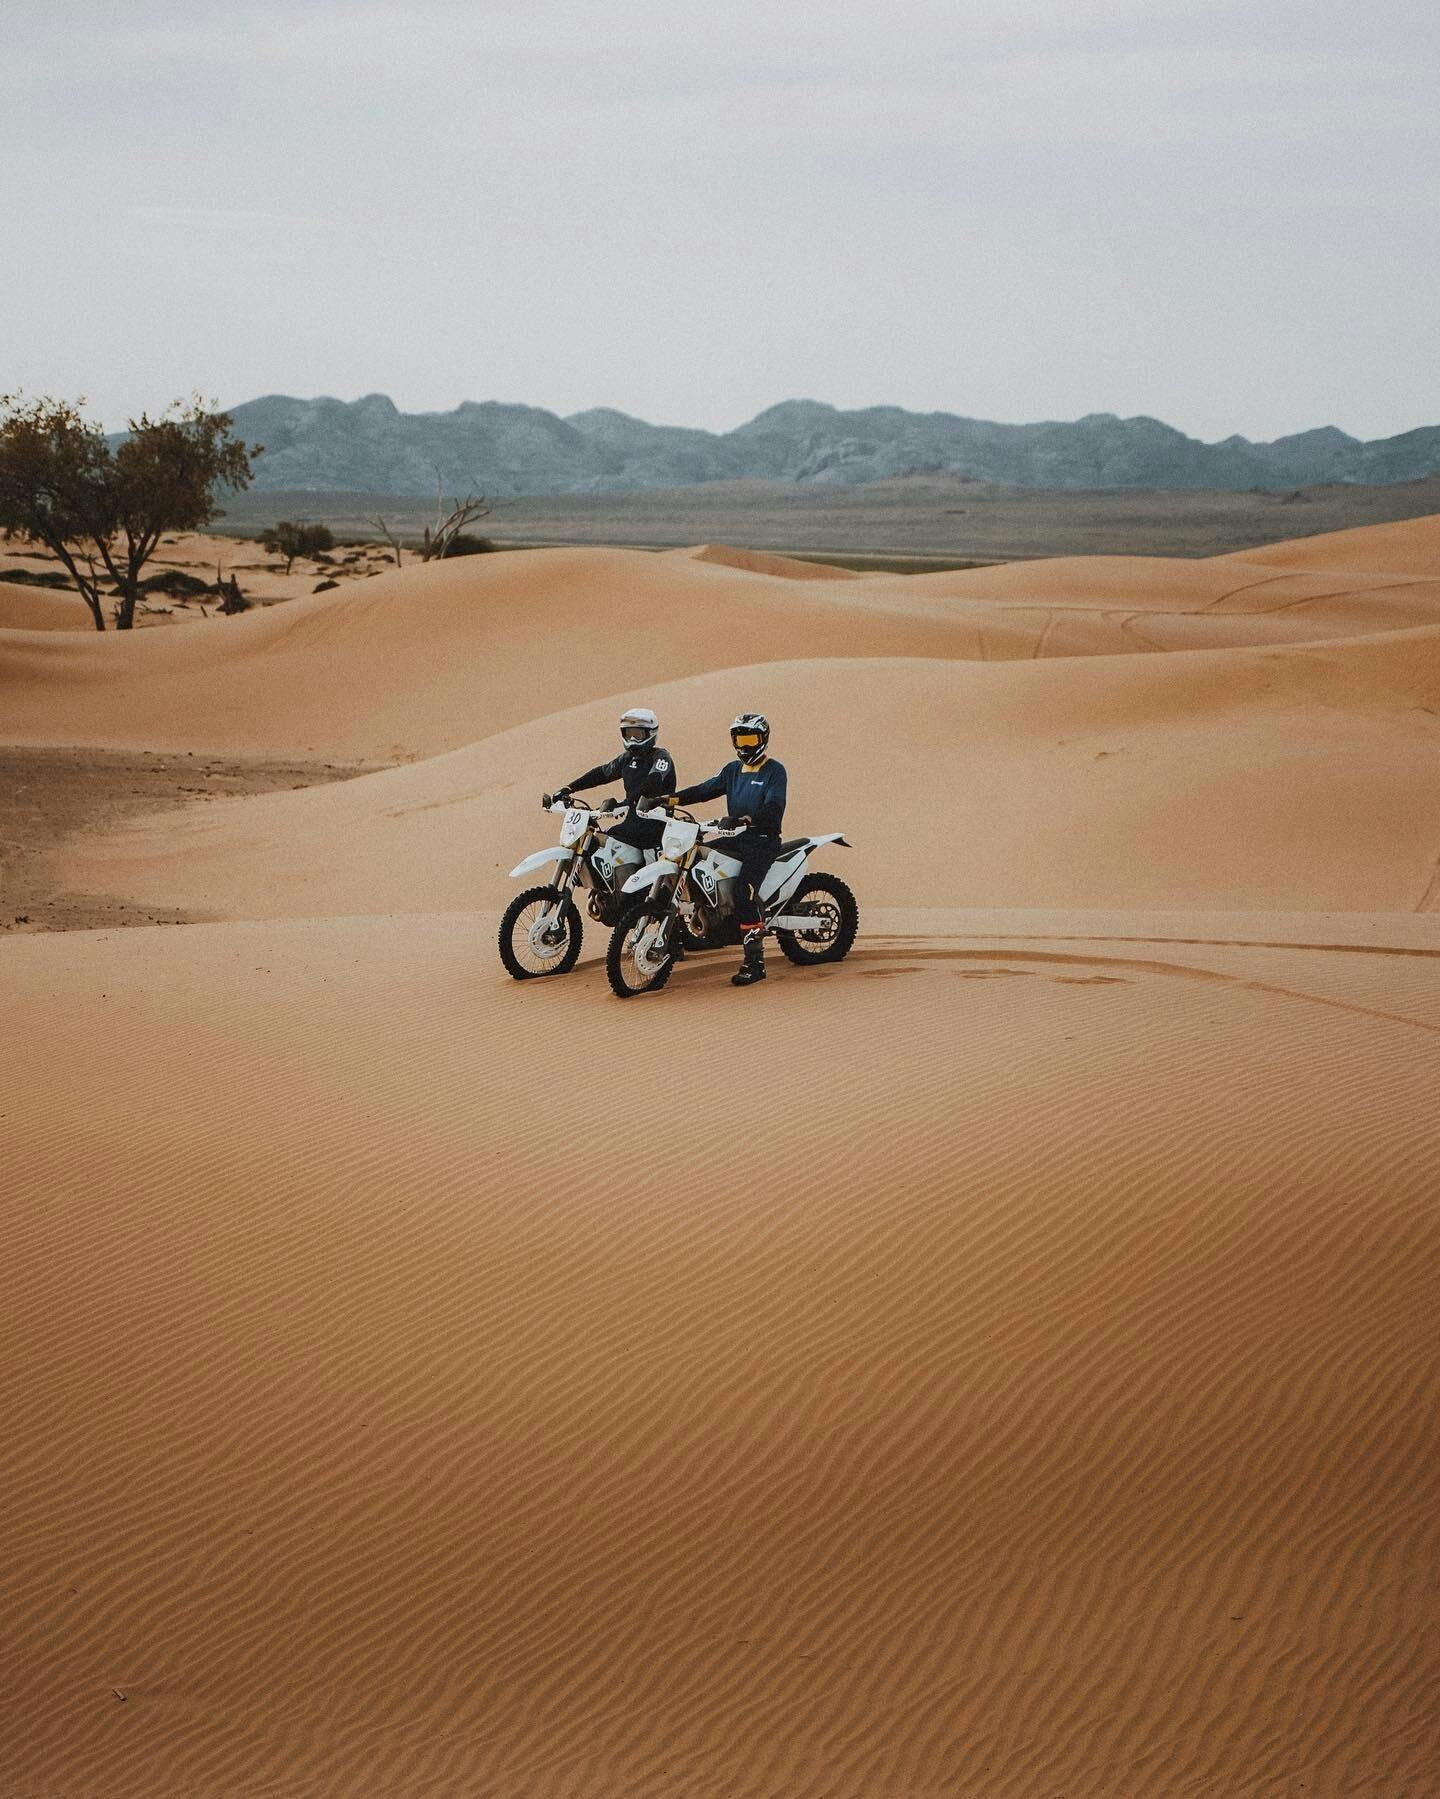 Two friends in the Gobi Desert of Mongolia riding a Husqvarna Enduro motorcycle.